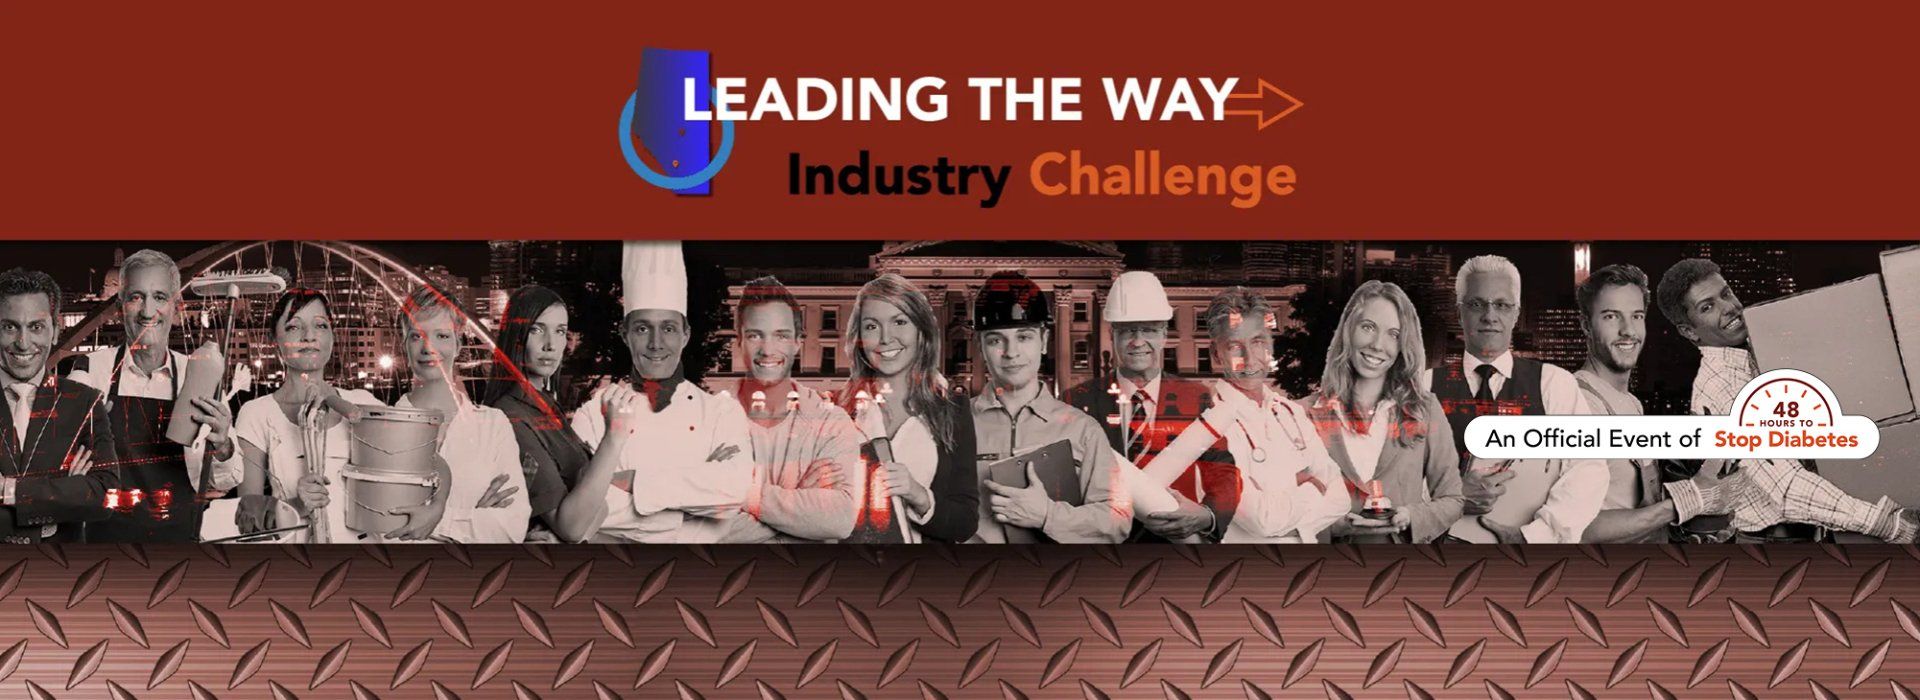 LEADING THE WAY Industry Challenge